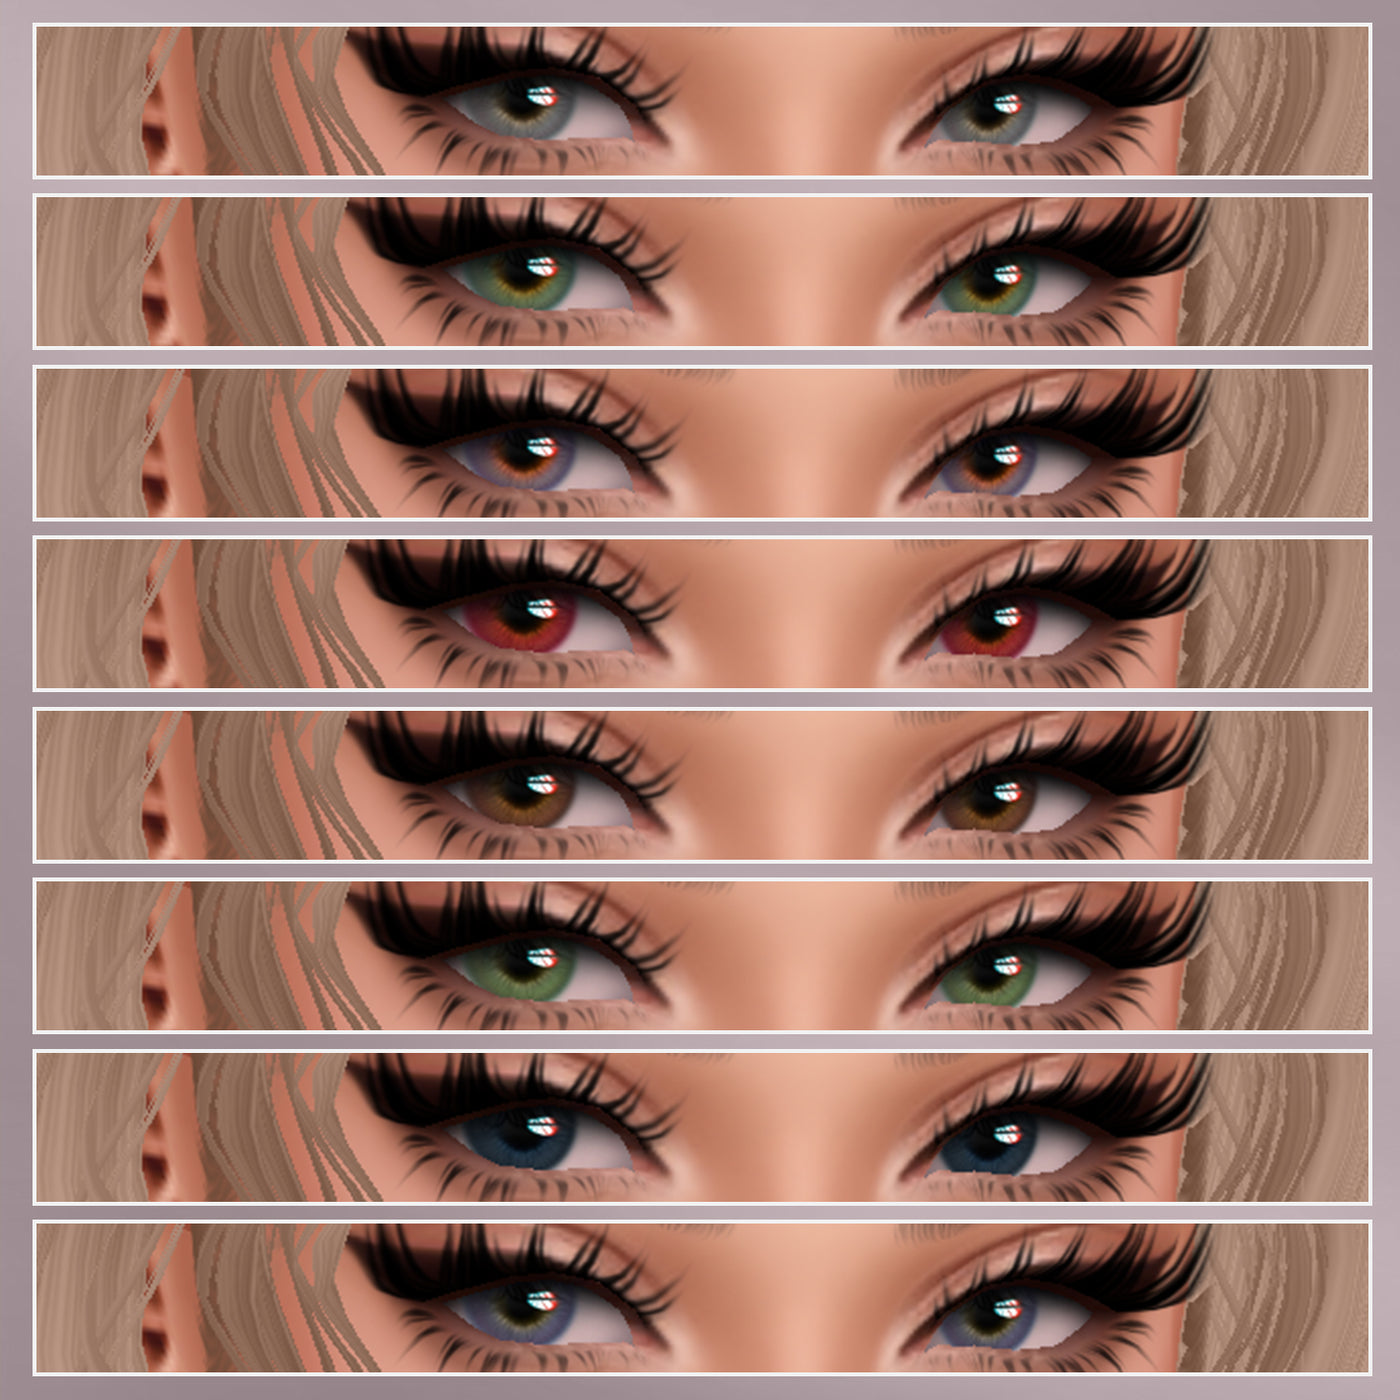 Sultry Eye Textures .Jpeg